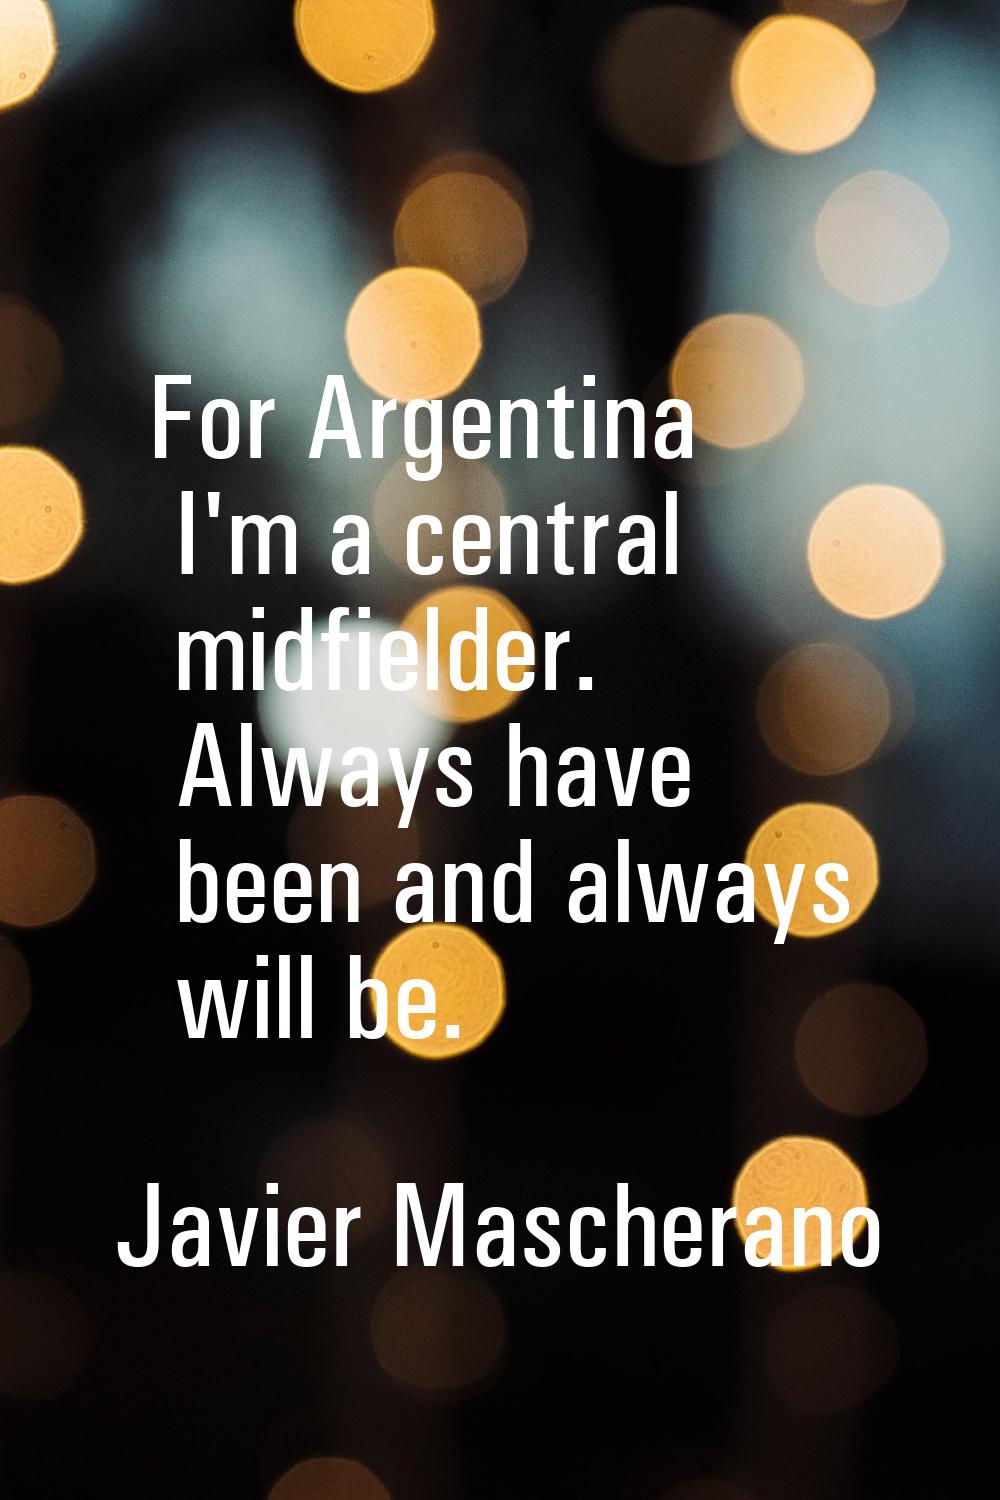 For Argentina I'm a central midfielder. Always have been and always will be.